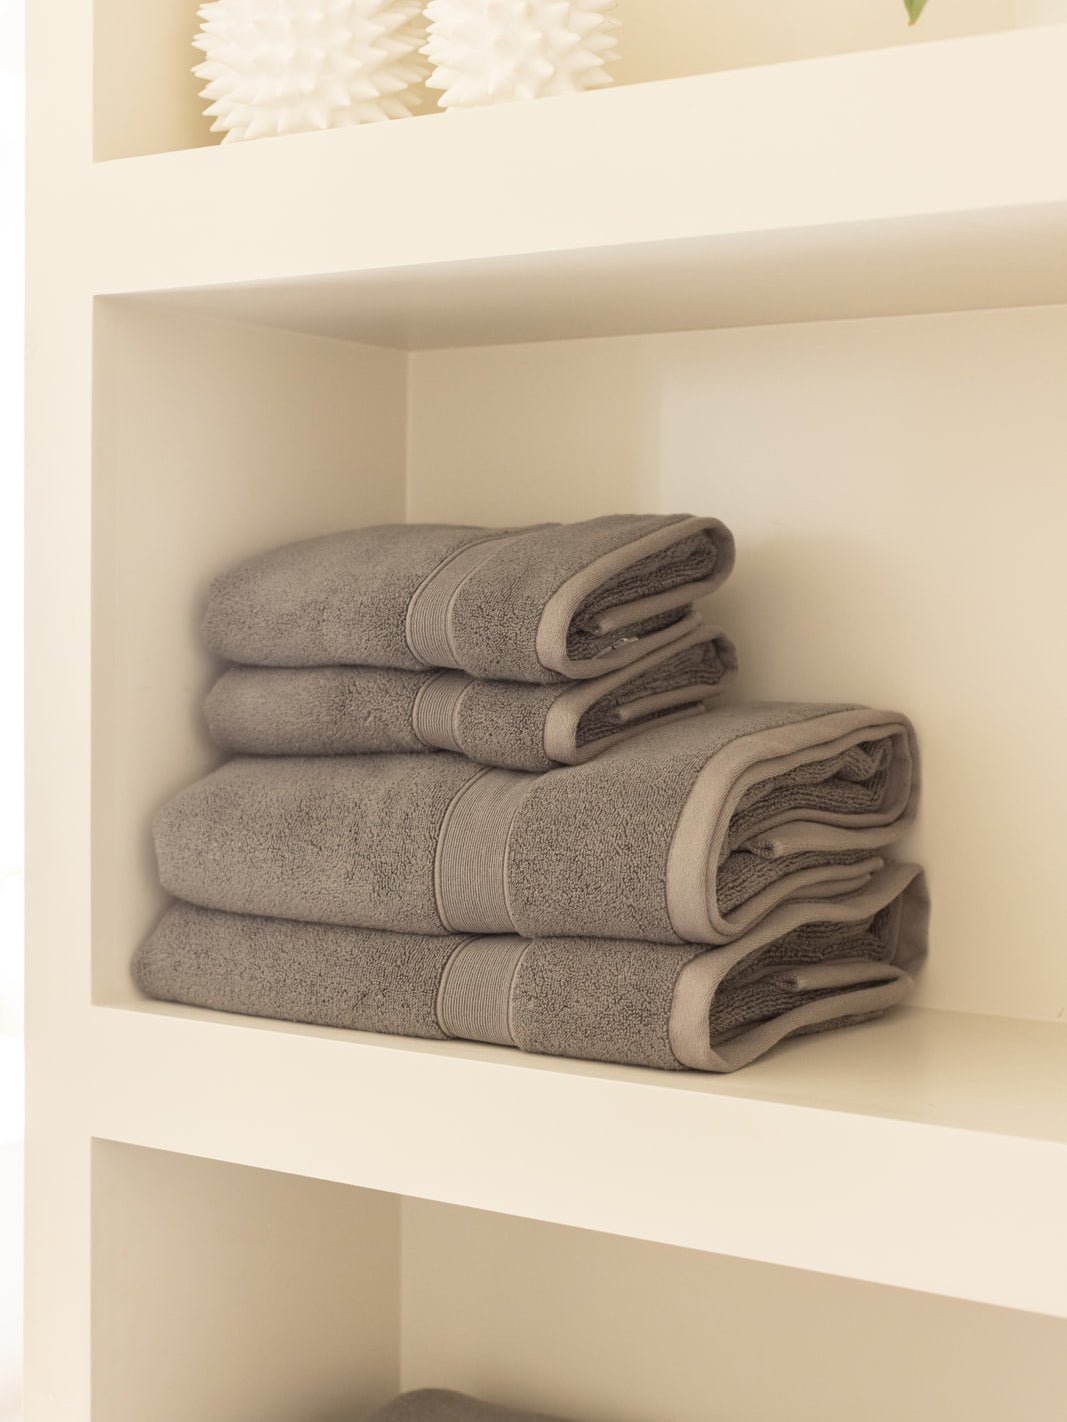 Charcoal luxe bath towels and hand towels folded on shelf 